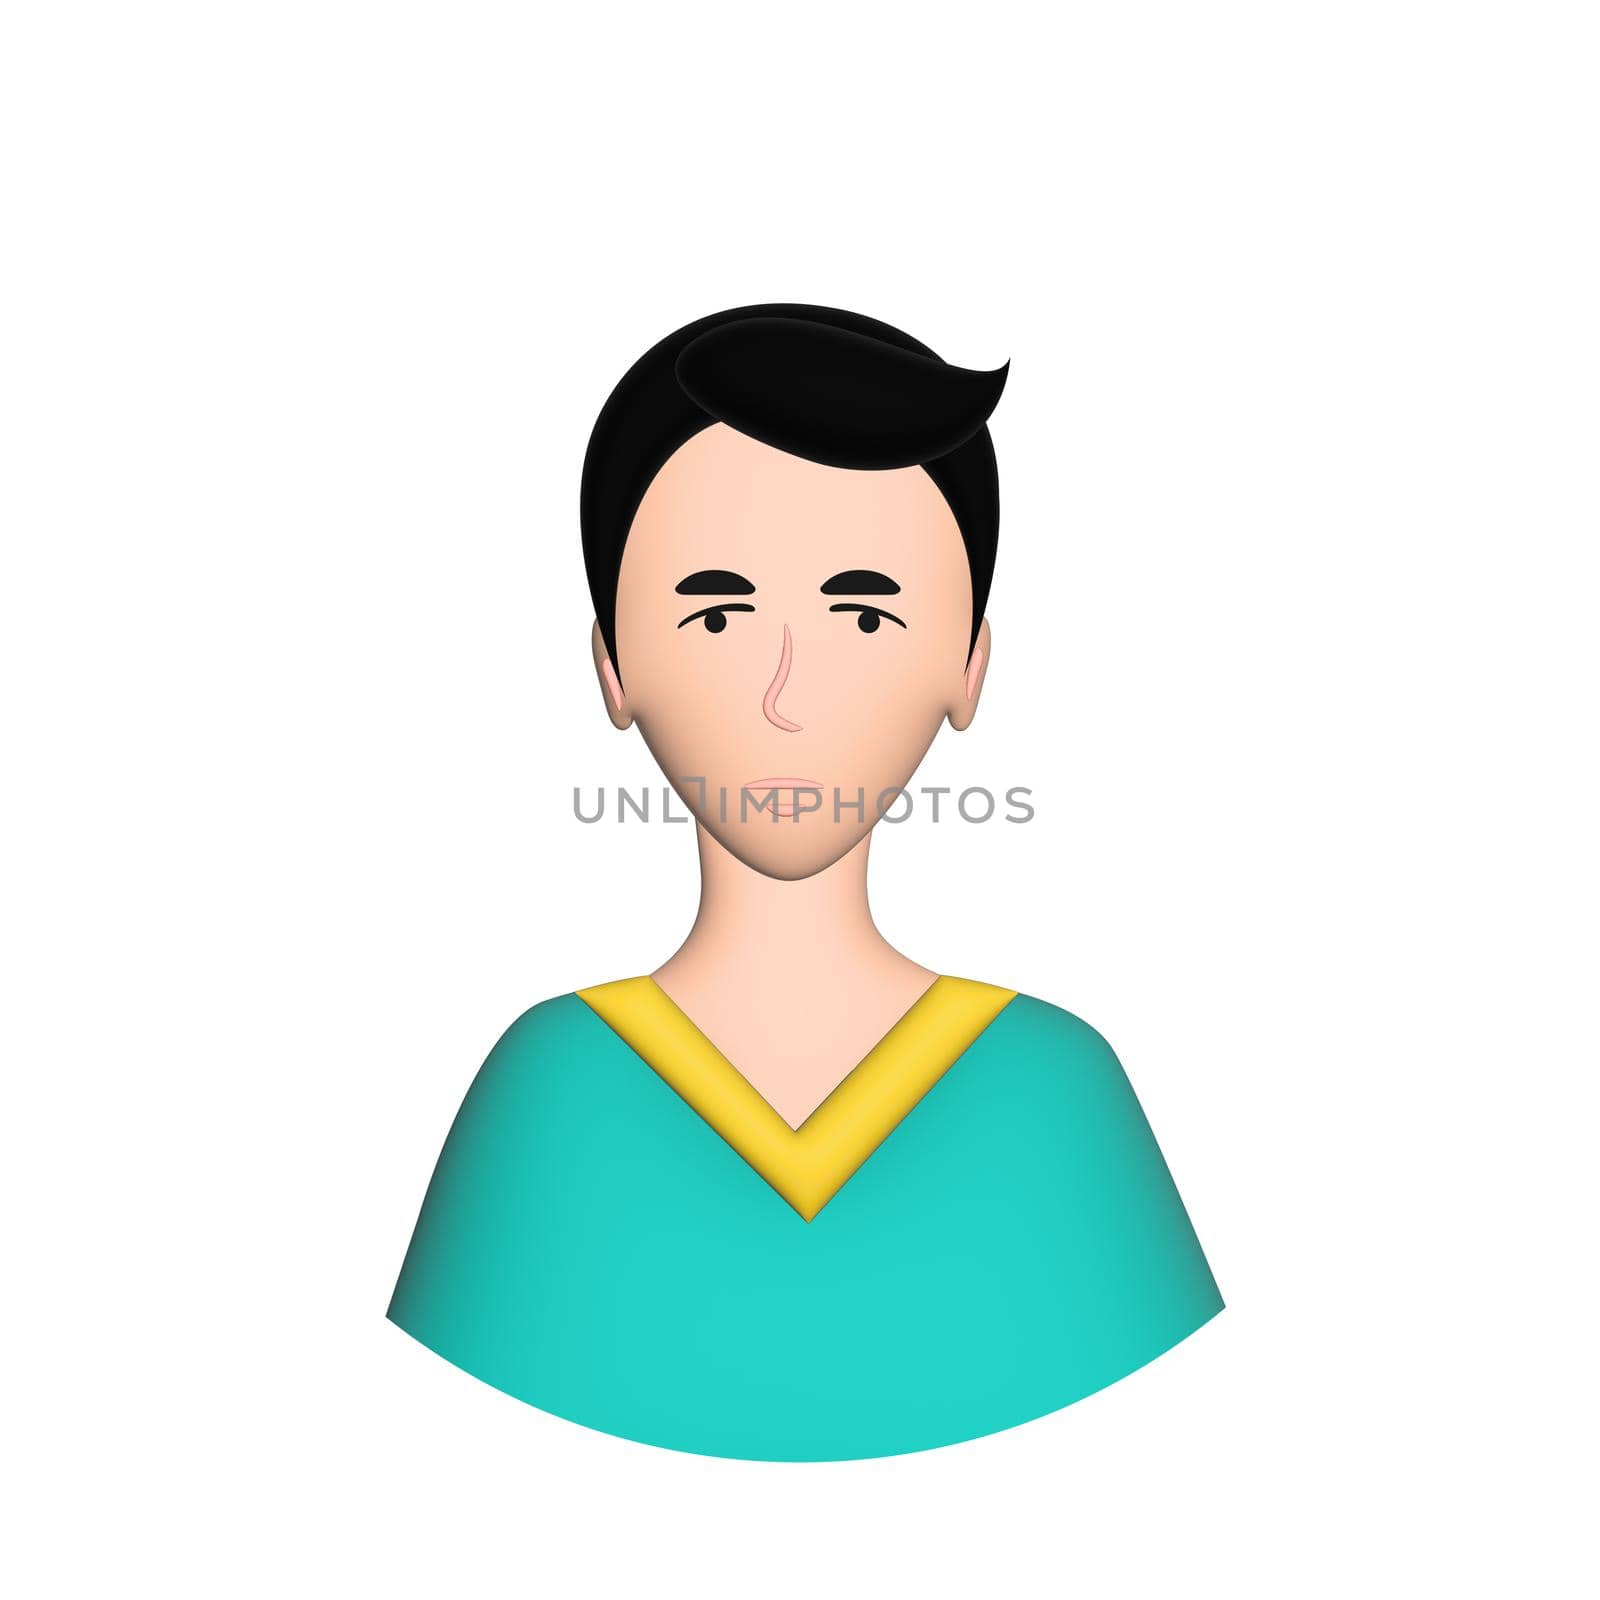 Web icon man, middle-aged man with dark hair - illustration